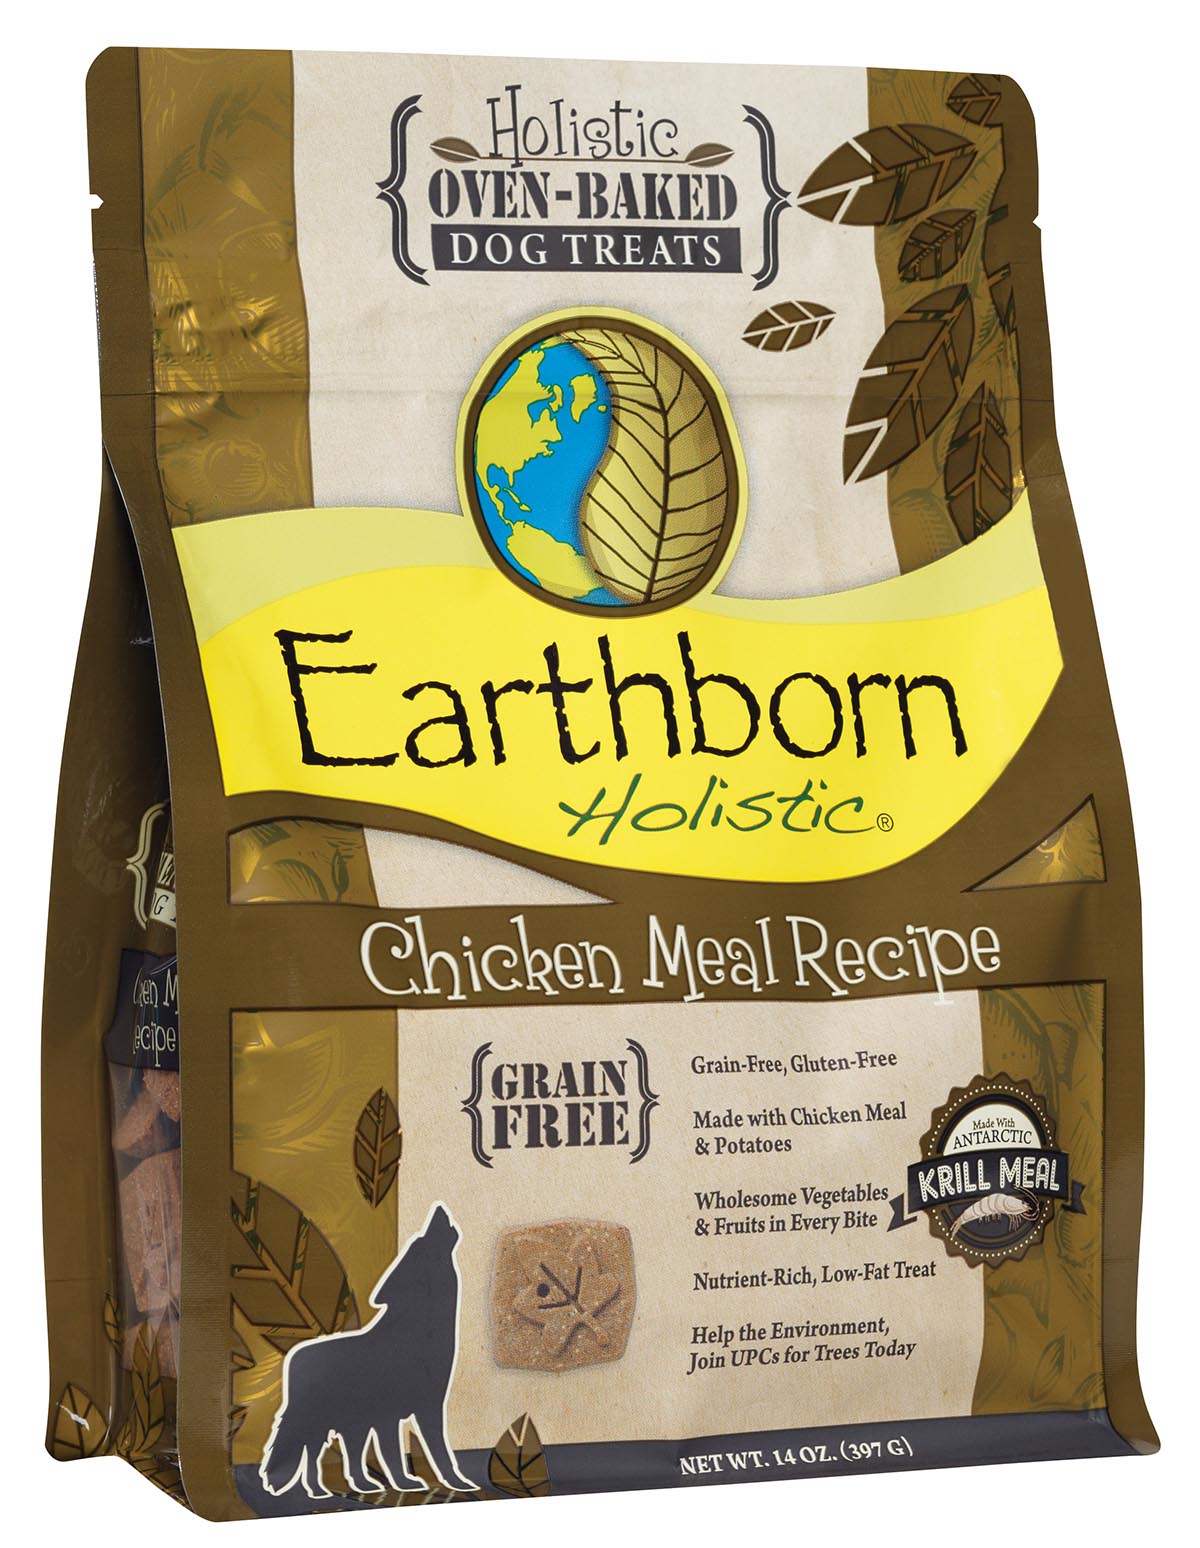 Earthborn Holistic Chicken Meal Recipe Biscuits, 14 oz